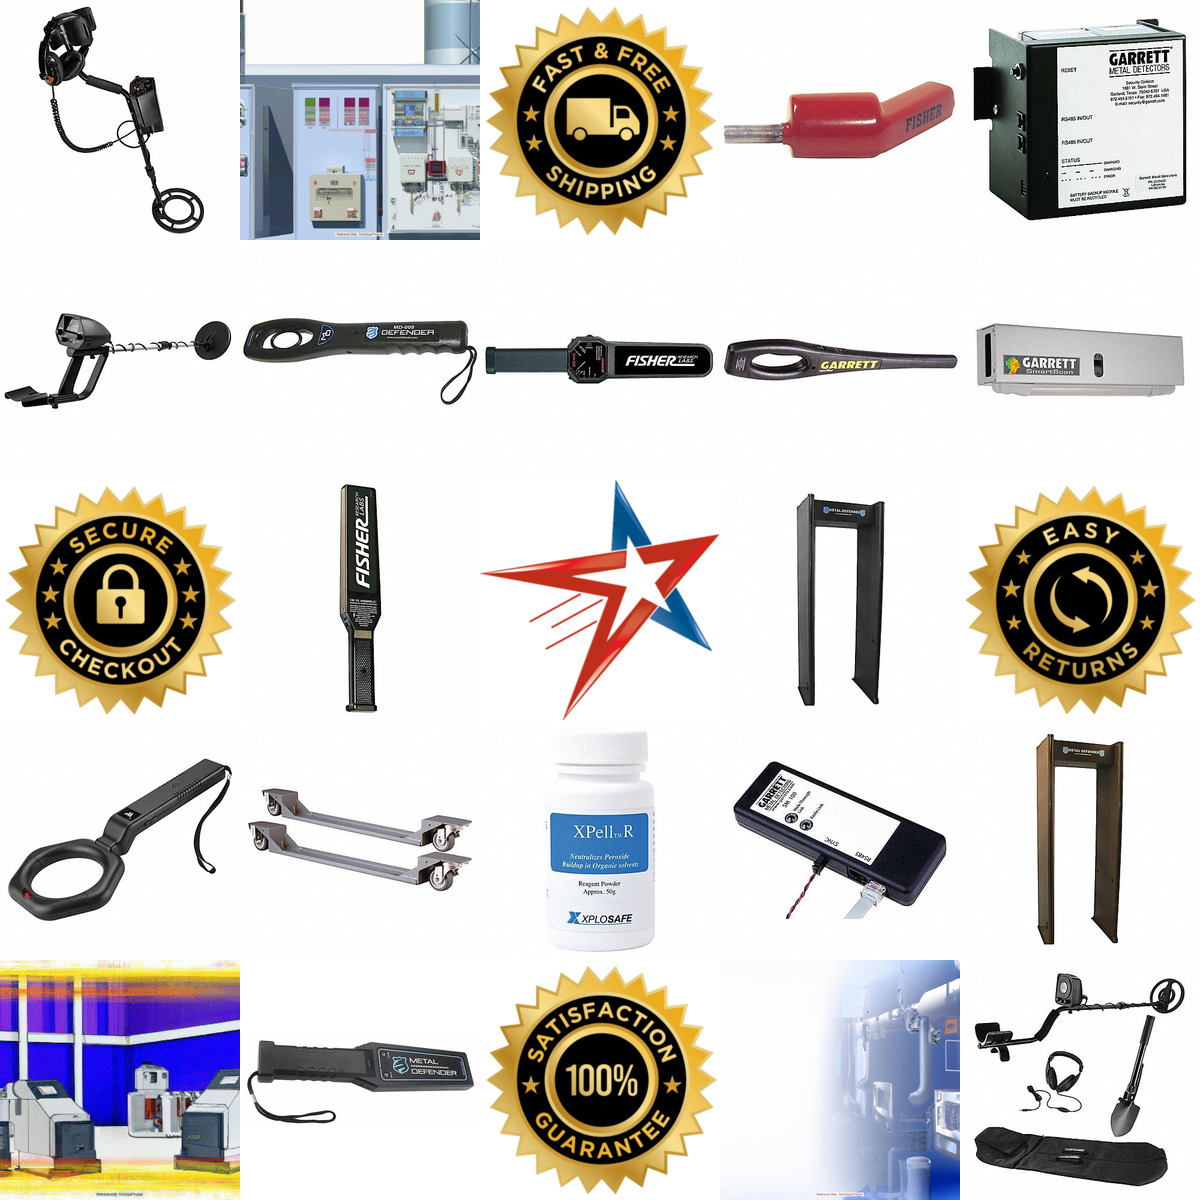 A selection of Detectors Scanners and Accessories products on GoVets